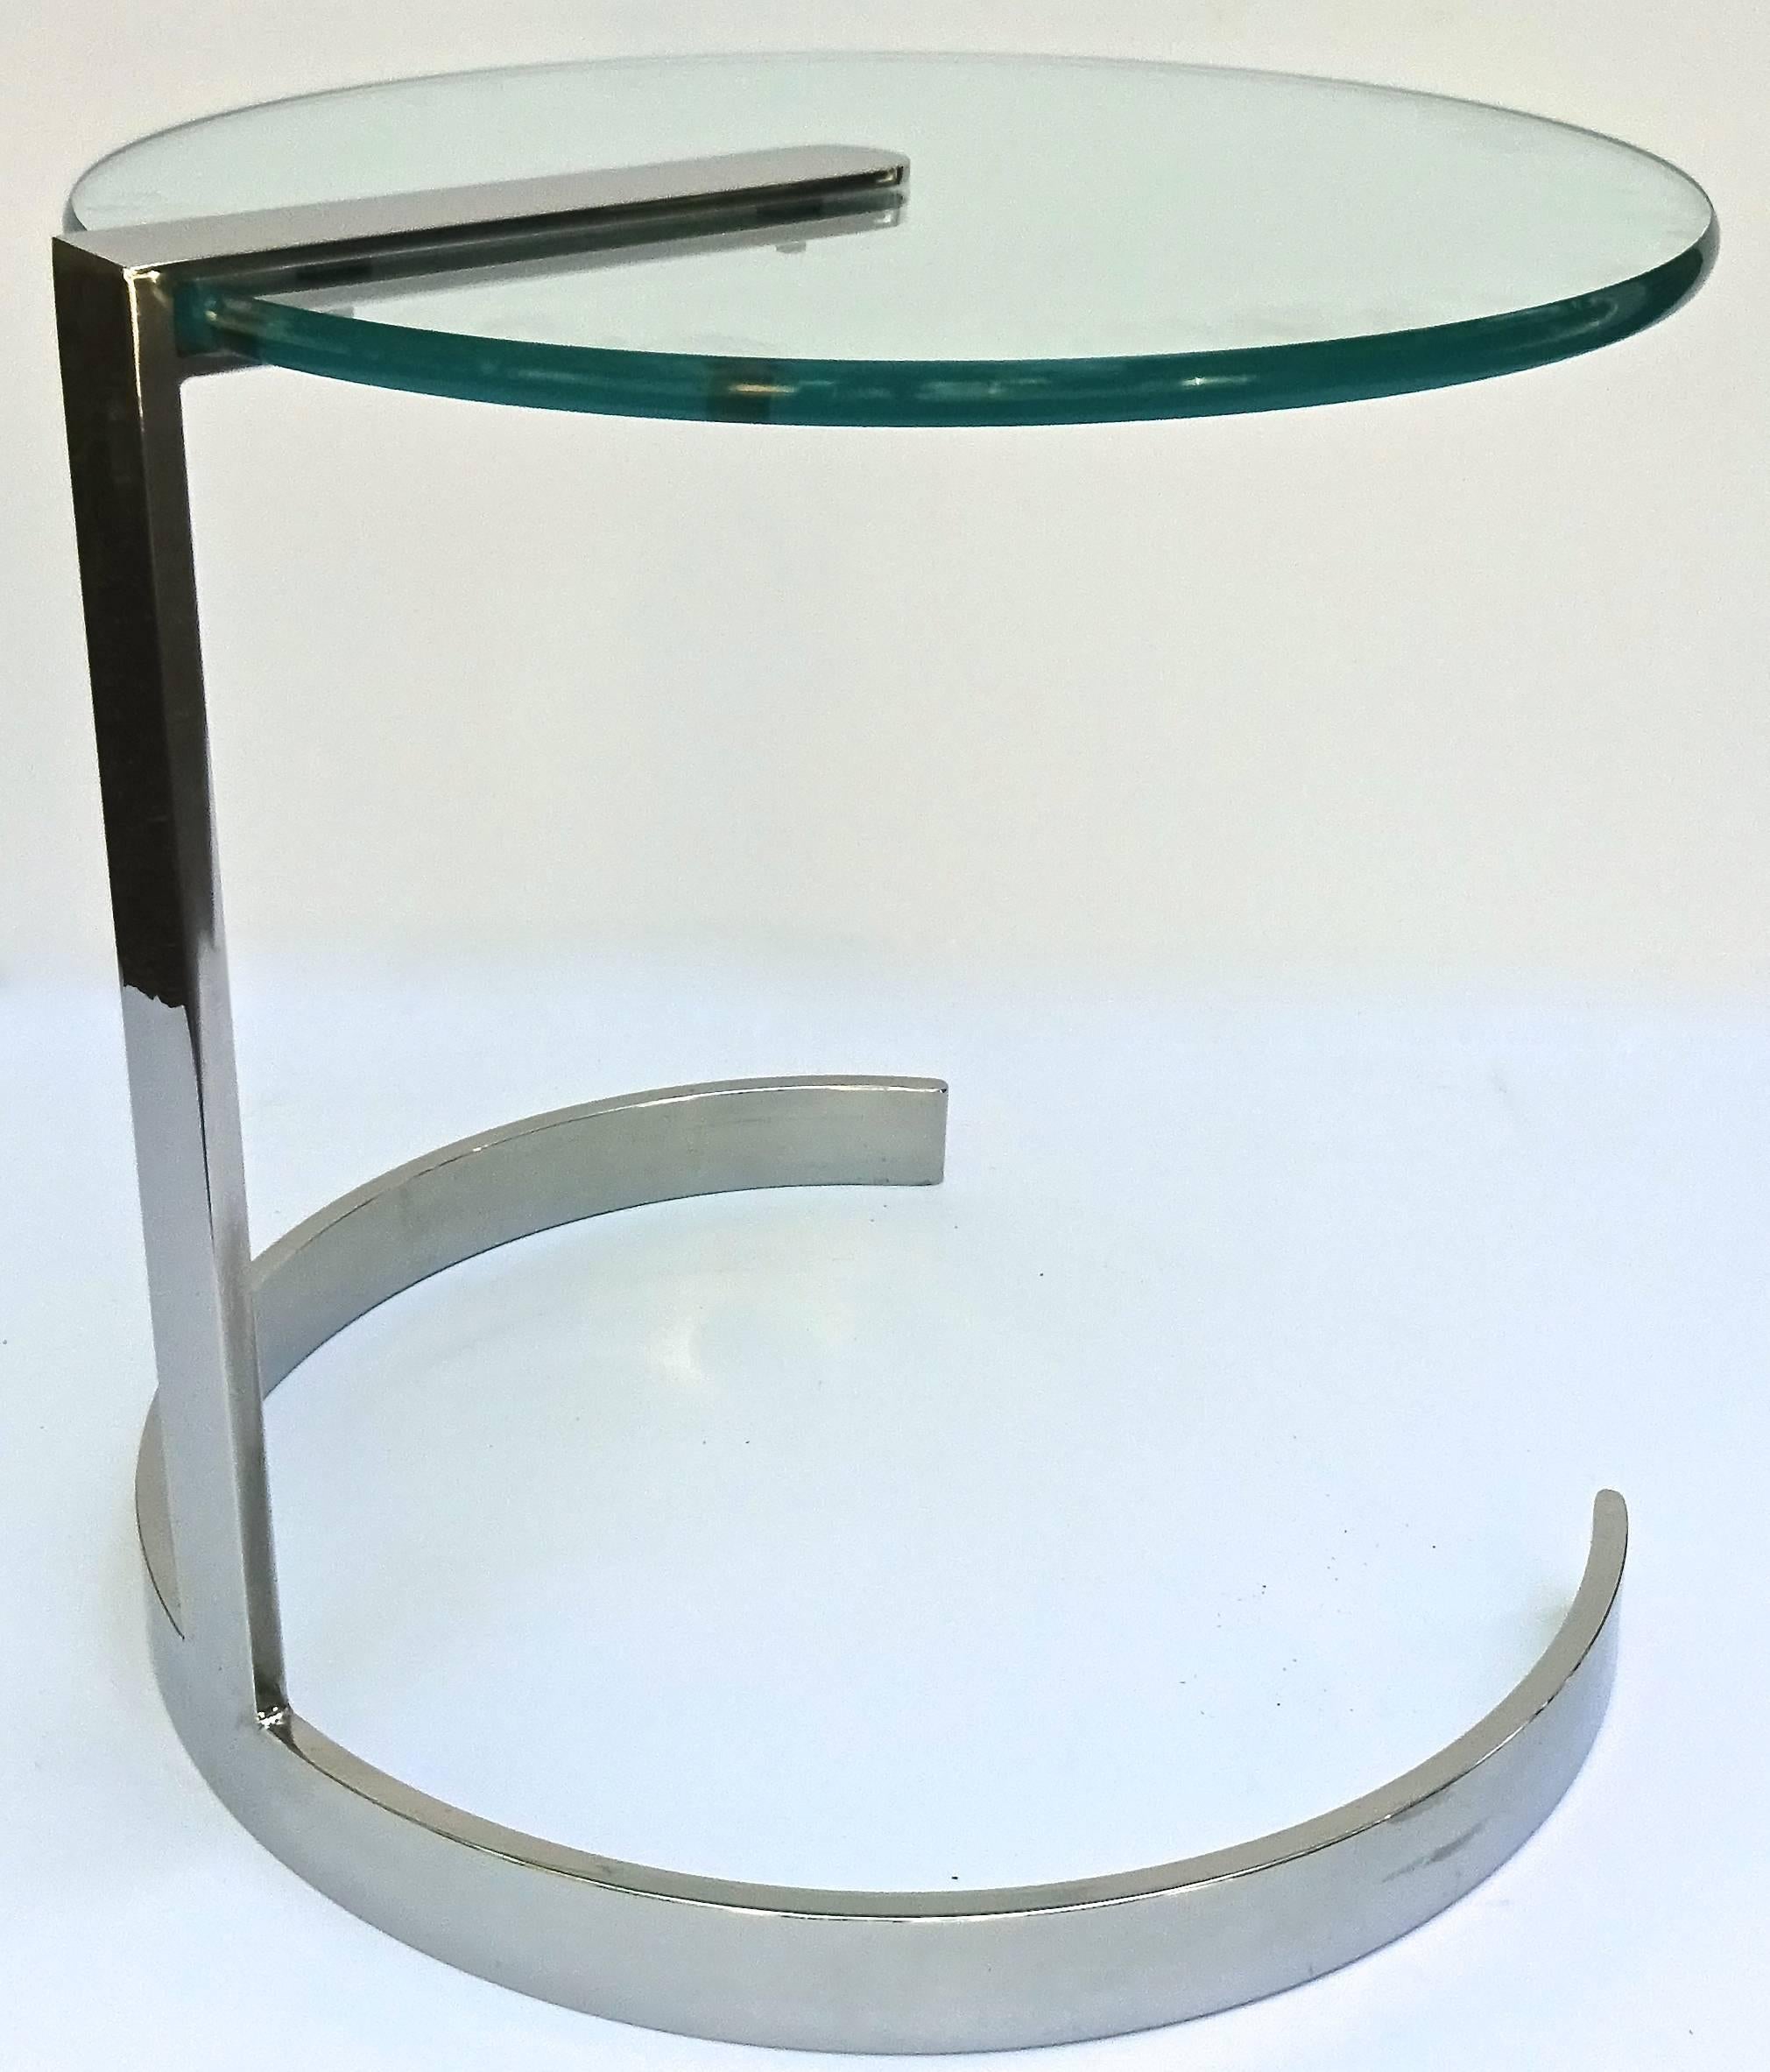 Sleek 1970s Pace Collection Chrome and Glass End Table In Excellent Condition For Sale In Washington, DC